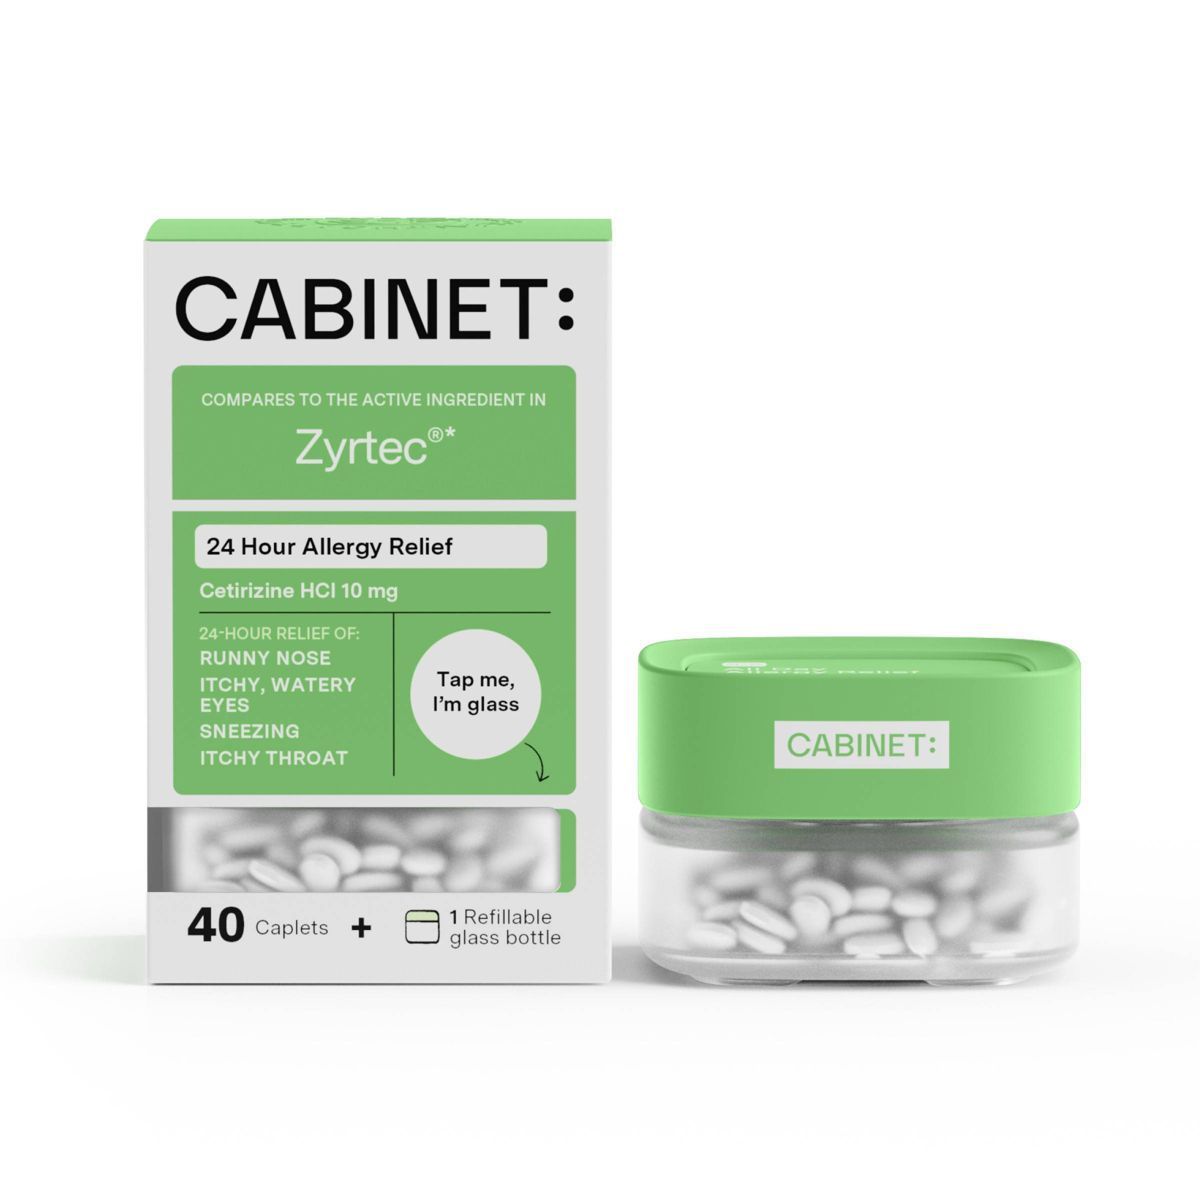 Cabinet Health 24hr Allergy Relief Cetirizine HCl 10mg Refillable Glass Bottle - 40ct | Target